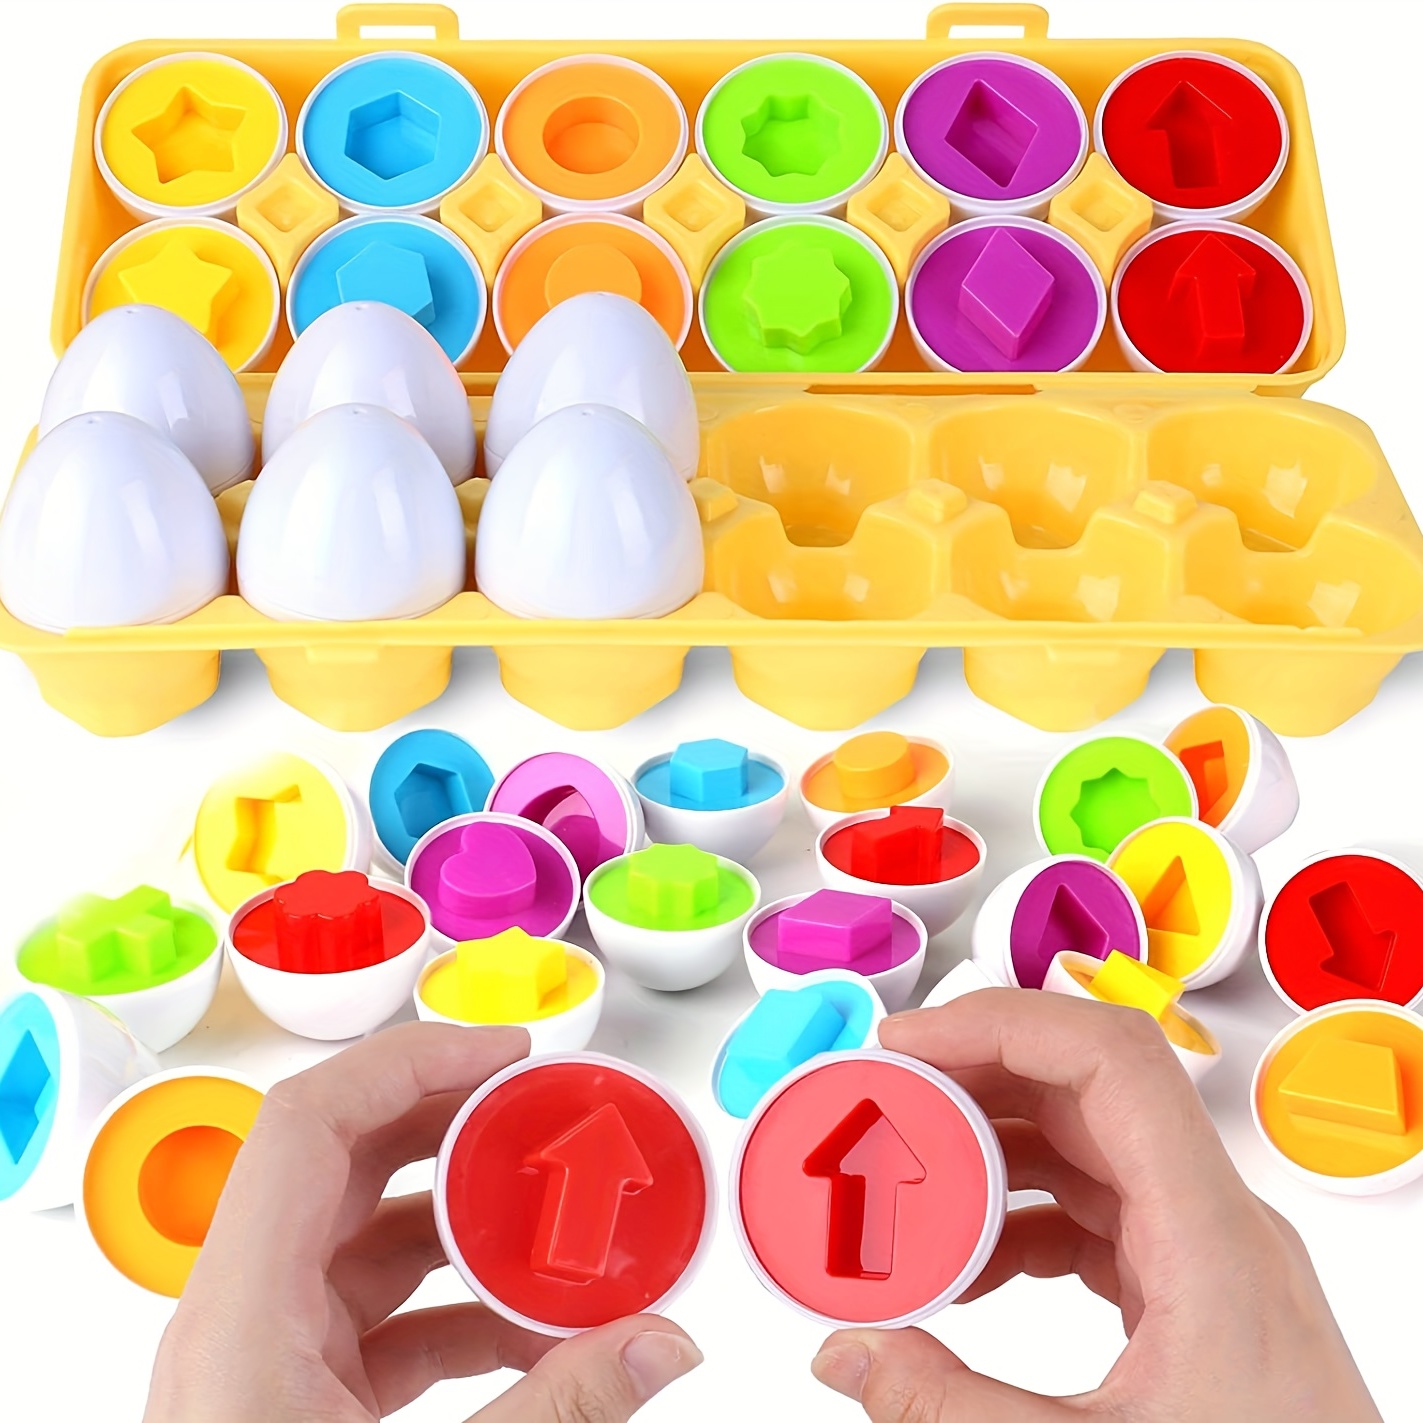 Color Matching Egg Set - Toddler Toys - Educational Color & Number  Recognition Skills Learning Egg Toy Egg Puzzle | Toys For Toddlers, Boys,  Girls, Kids